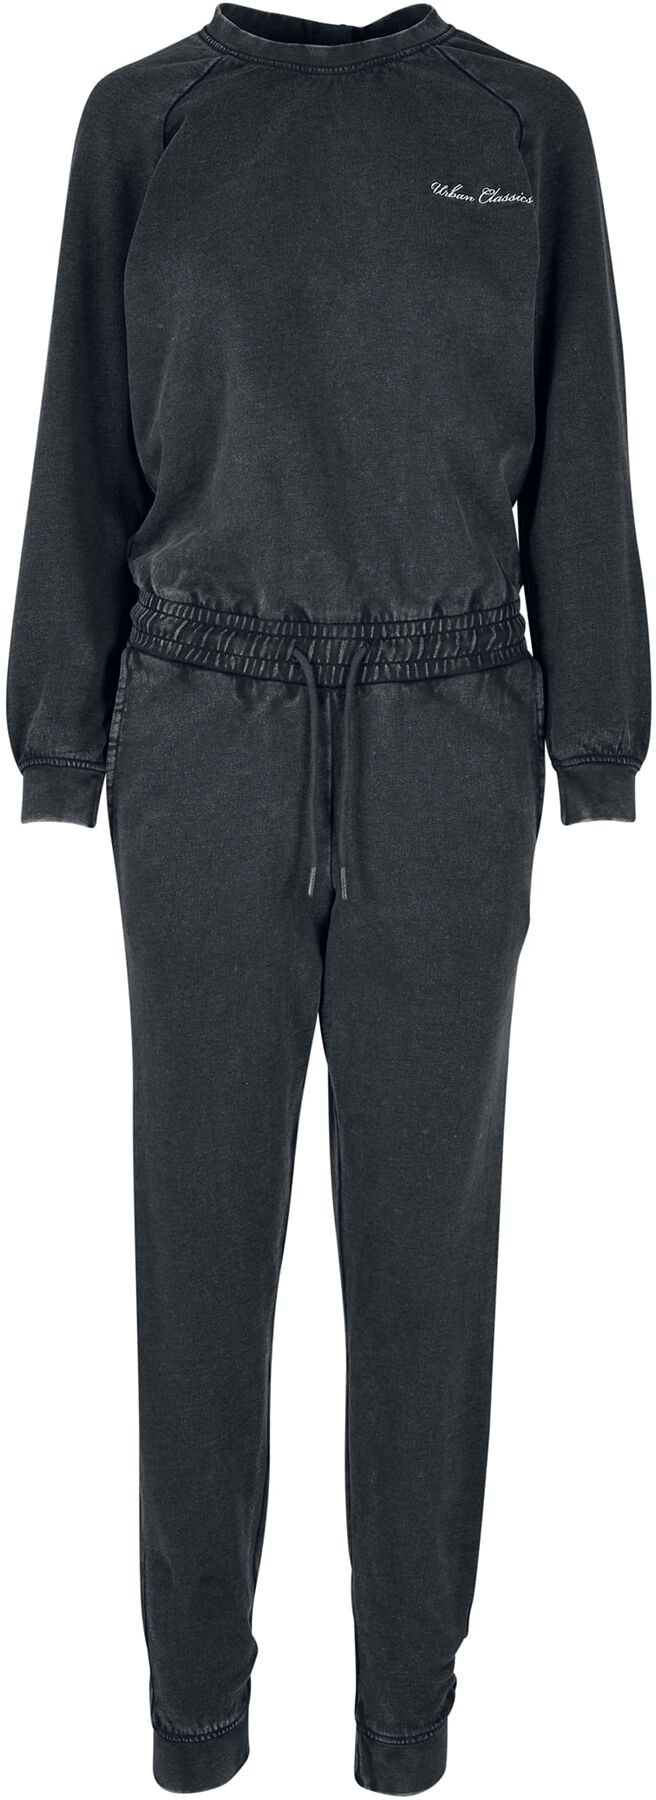 Ladies Small Embroidery Long Sleeve Terry Jumpsuit Jumpsuit schwarz von Urban Classics